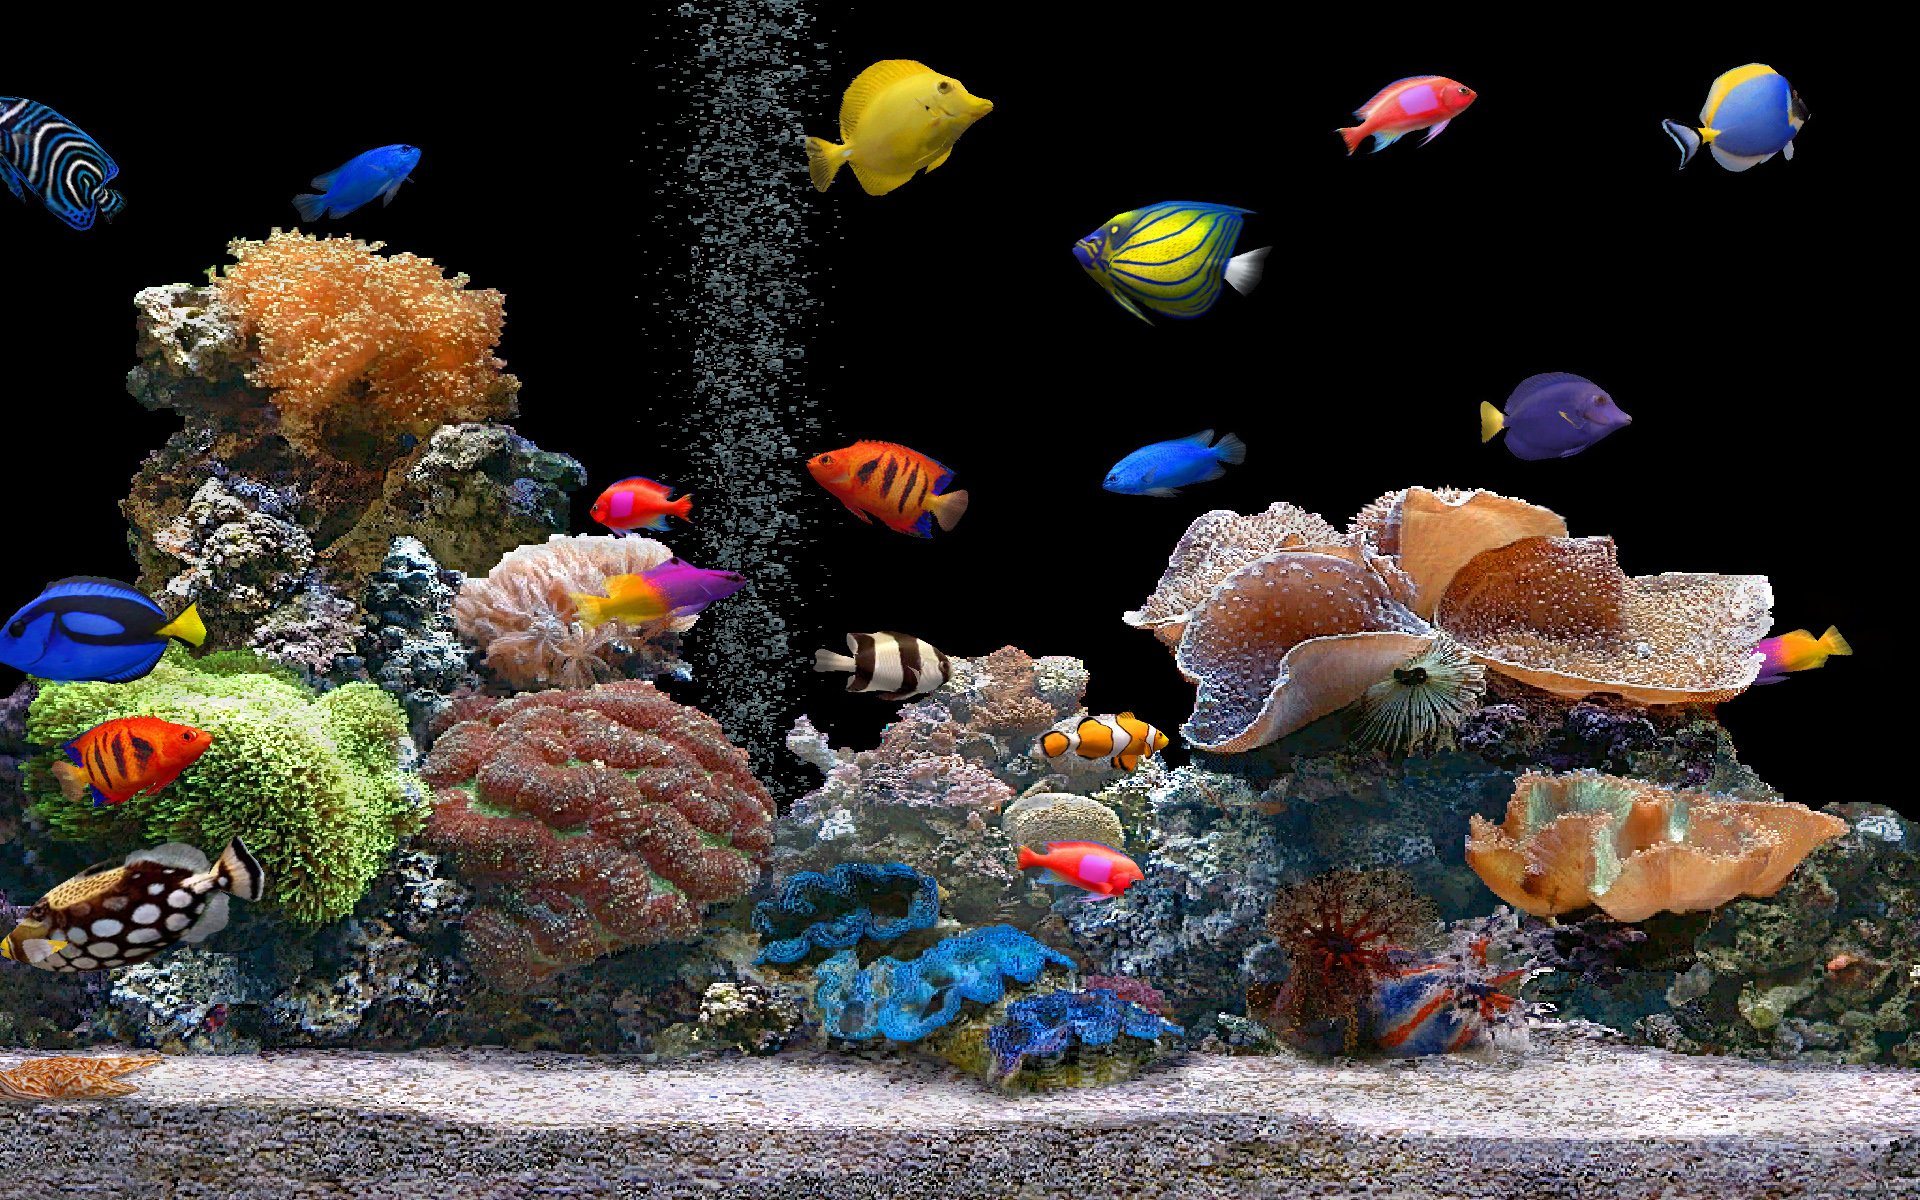 Futuristic Download Live Wallpapers For Pc Aquarium for Gamers